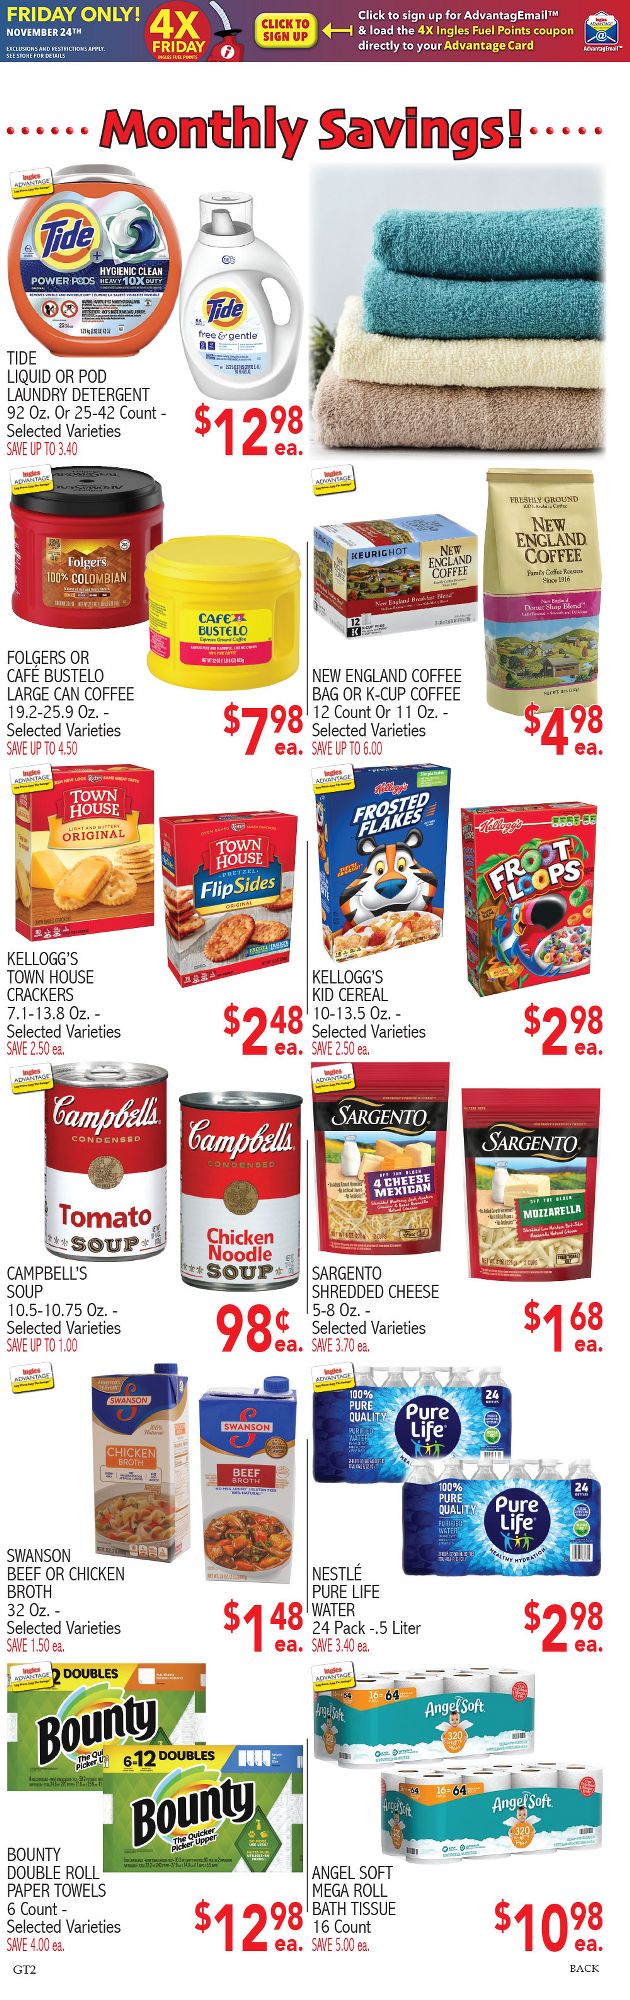 Ingles Black Friday July 2024 Weekly Sales, Deals, Discounts and Digital Coupons.